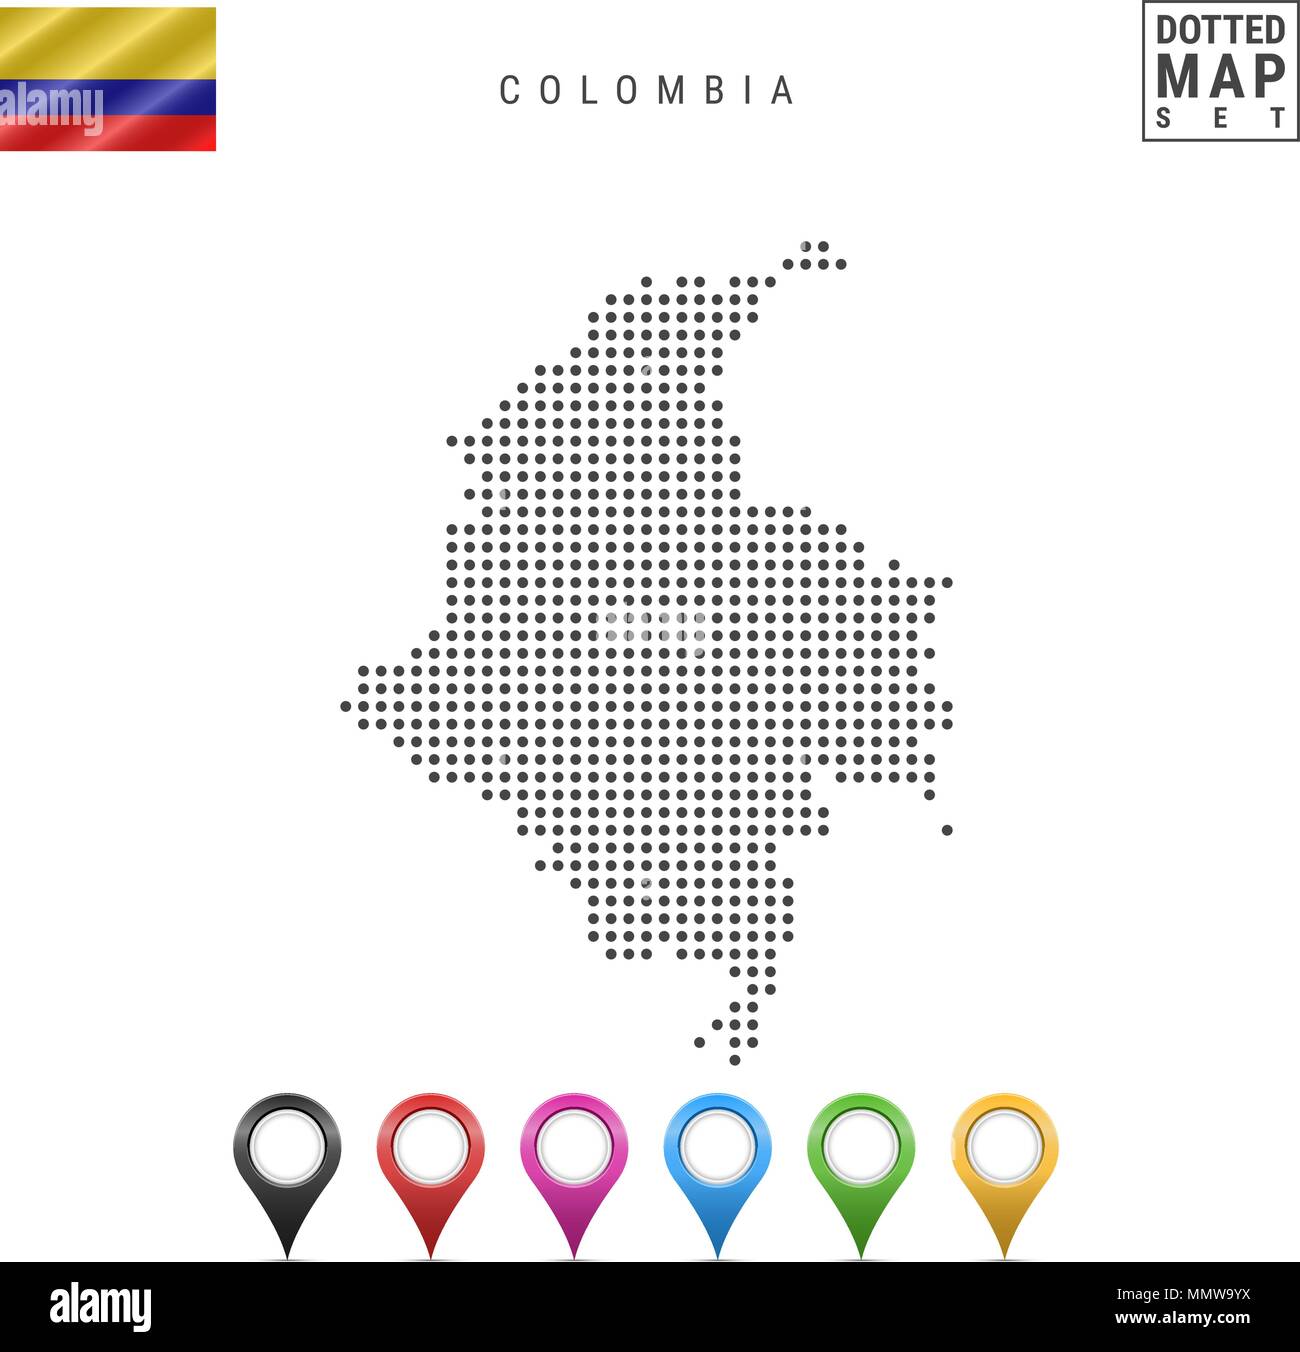 Vector Dotted Map of Colombia. Simple Silhouette of Colombia. National Flag of Colombia. Set of Multicolored Map Markers Stock Vector